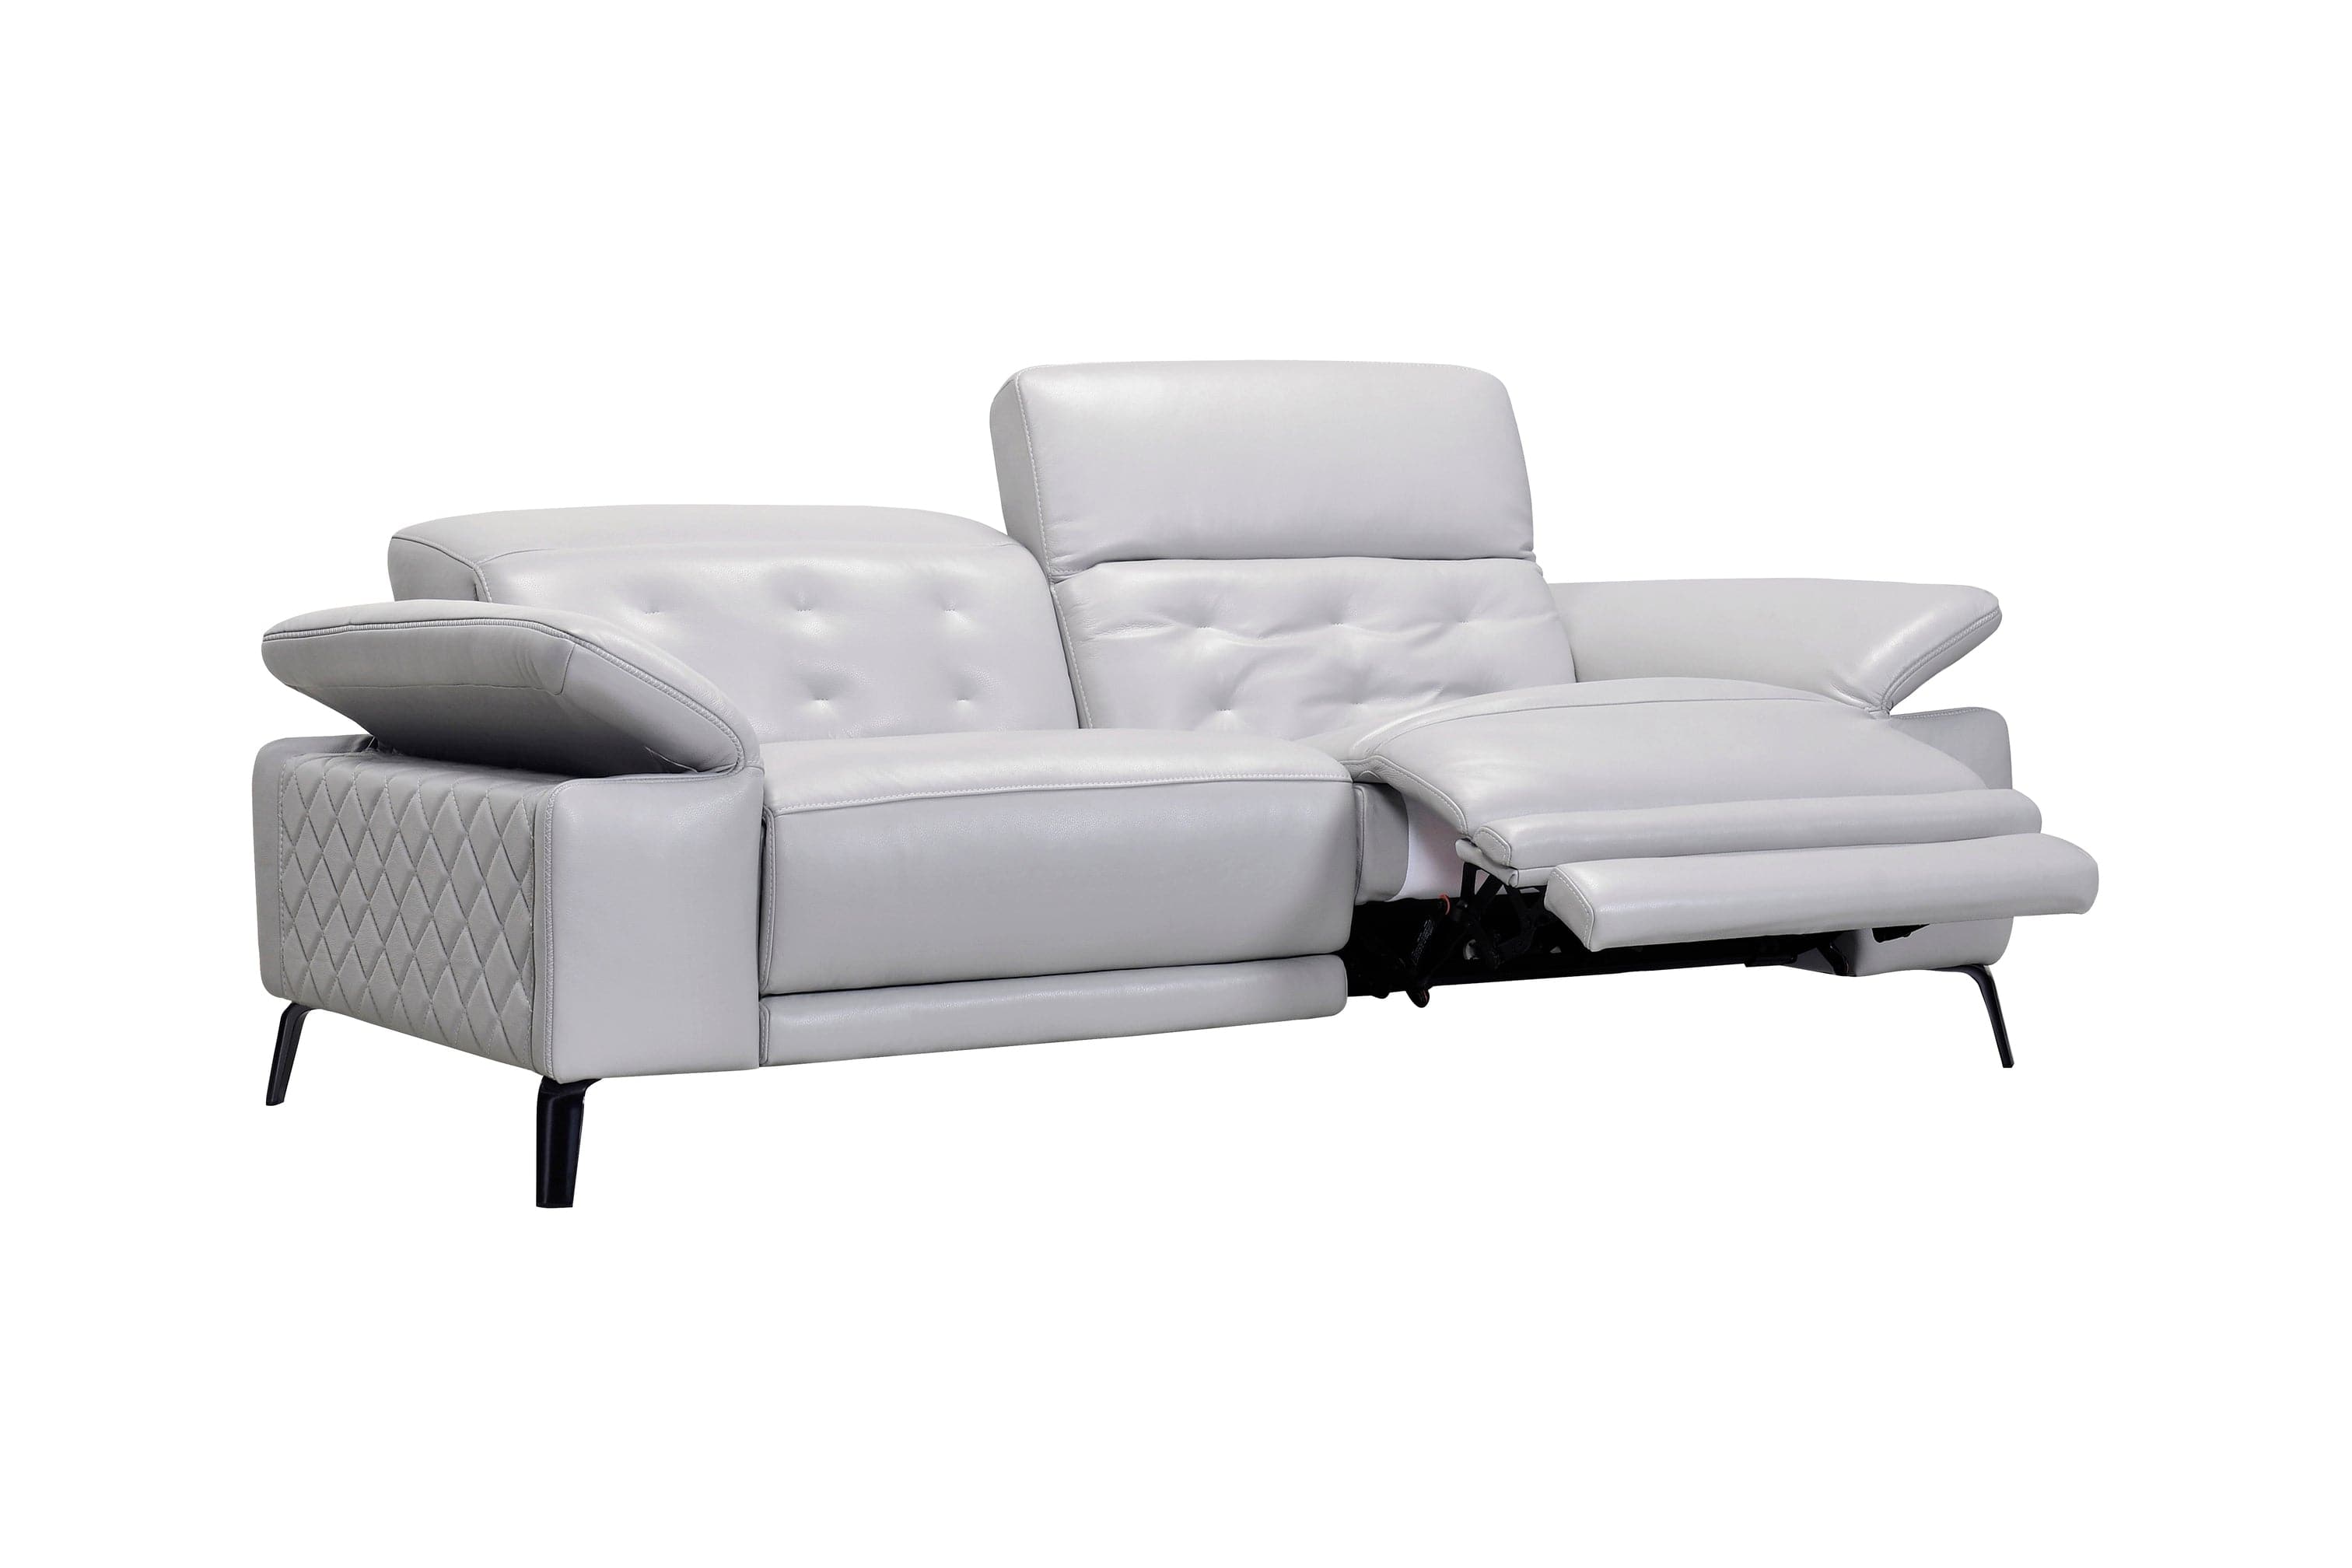 Elouise Sofa / Power Incliner + Adjustable Armrest + Headrest / Full Leather Casa Concetto Singapore